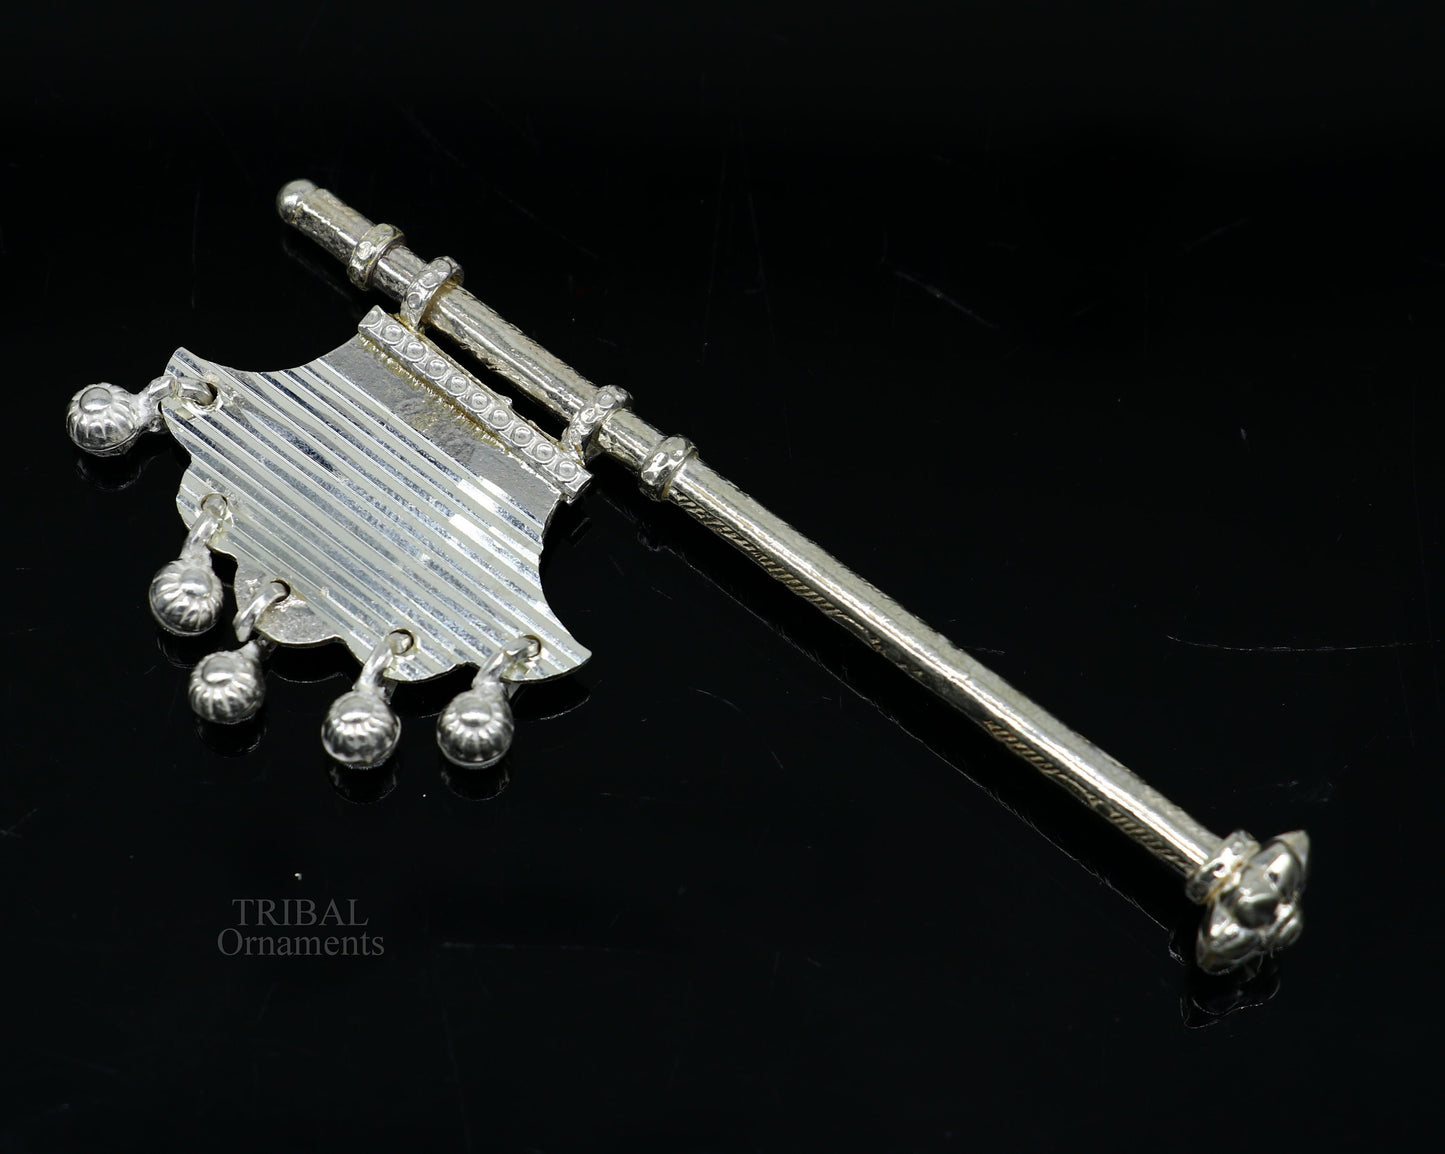 925 sterling silver pankhi, small fan or pankhi for god puja, best gifting to laddu gopala krishna, silver hand fan puja article su689 - TRIBAL ORNAMENTS